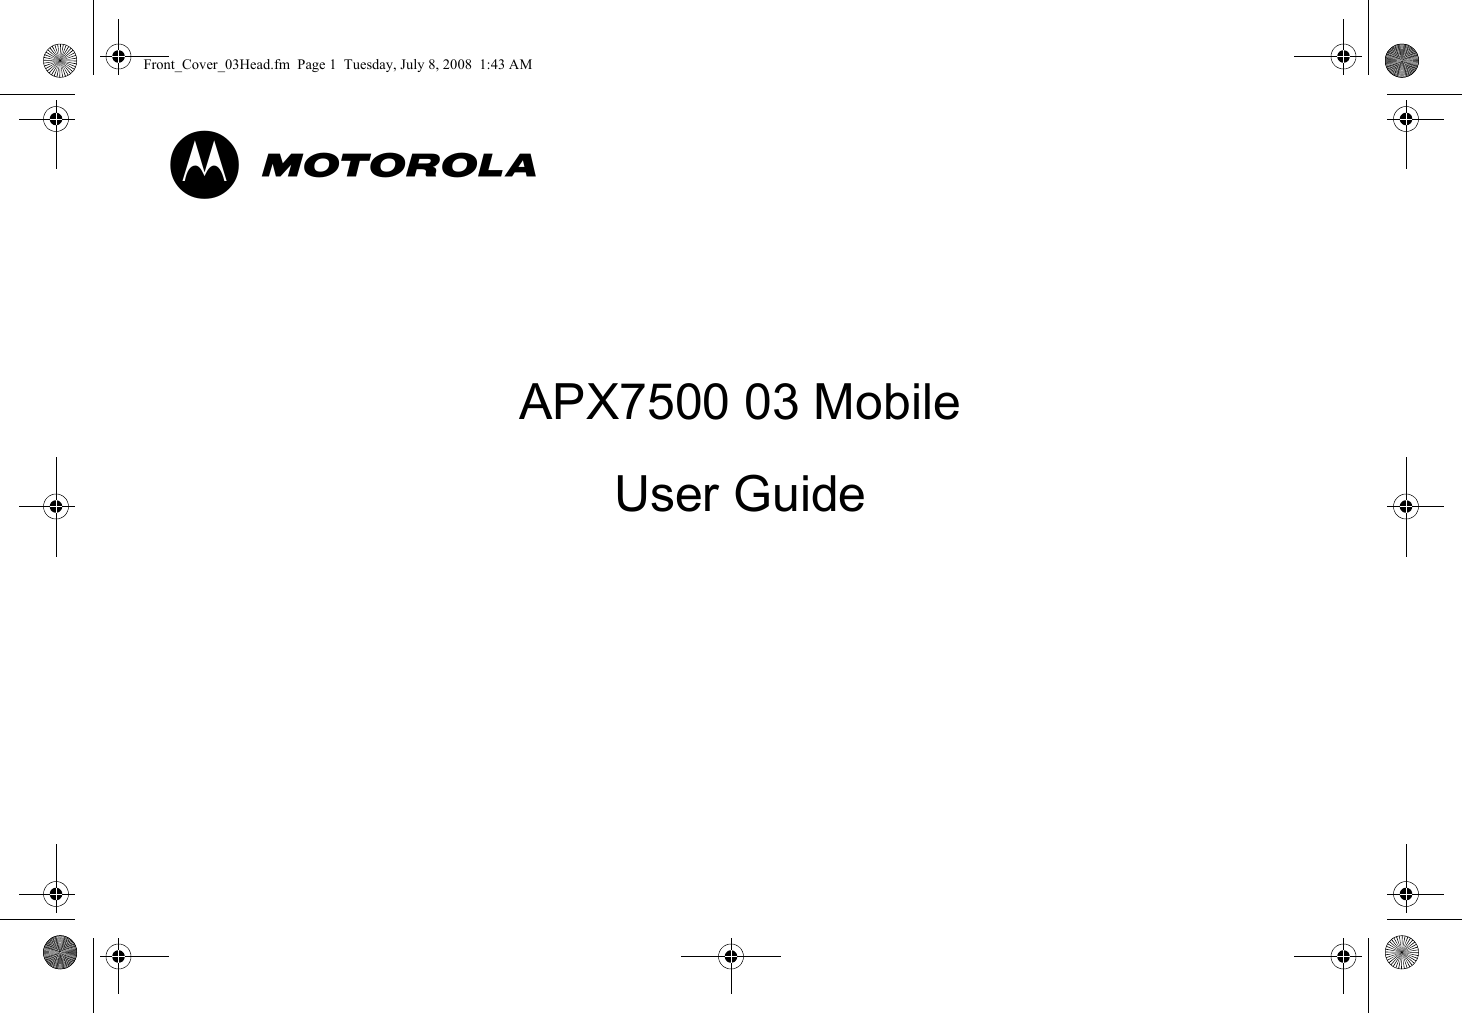 mAPX7500 03 Mobile  User GuideFront_Cover_03Head.fm  Page 1  Tuesday, July 8, 2008  1:43 AM